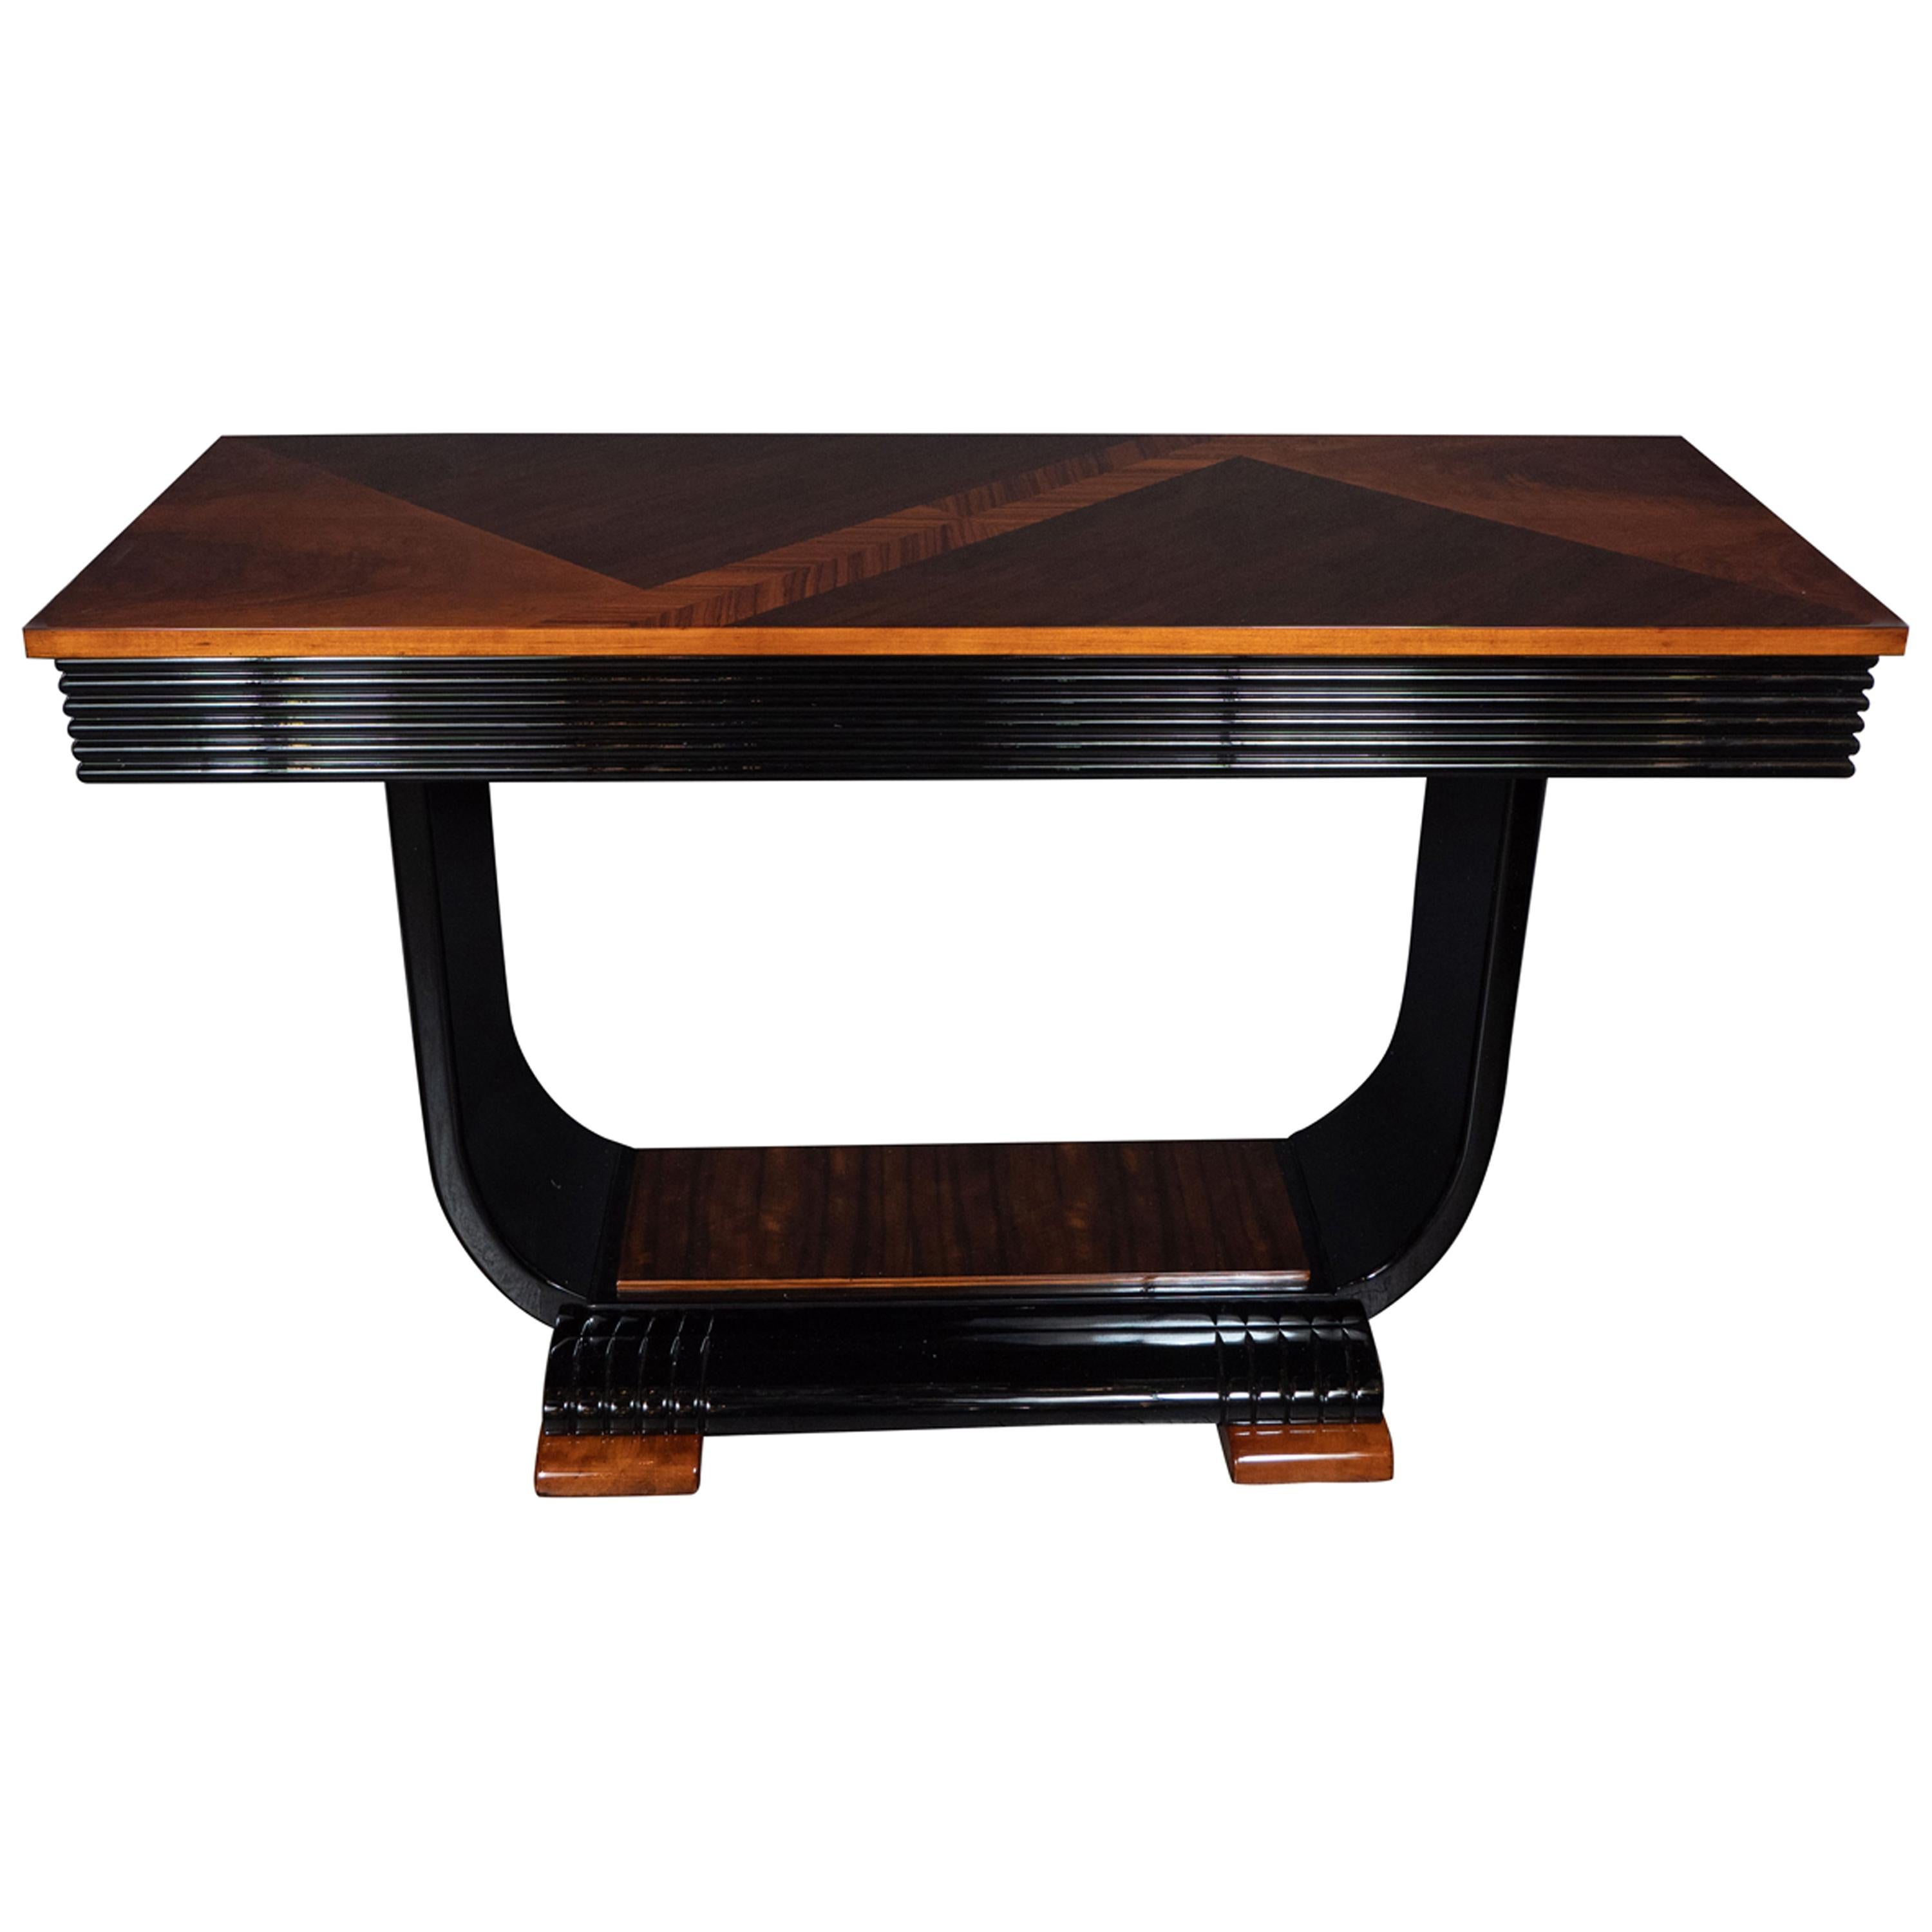 Art Deco Streamlined Black Lacquer, Bookmatched Walnut & Rosewood Console Table